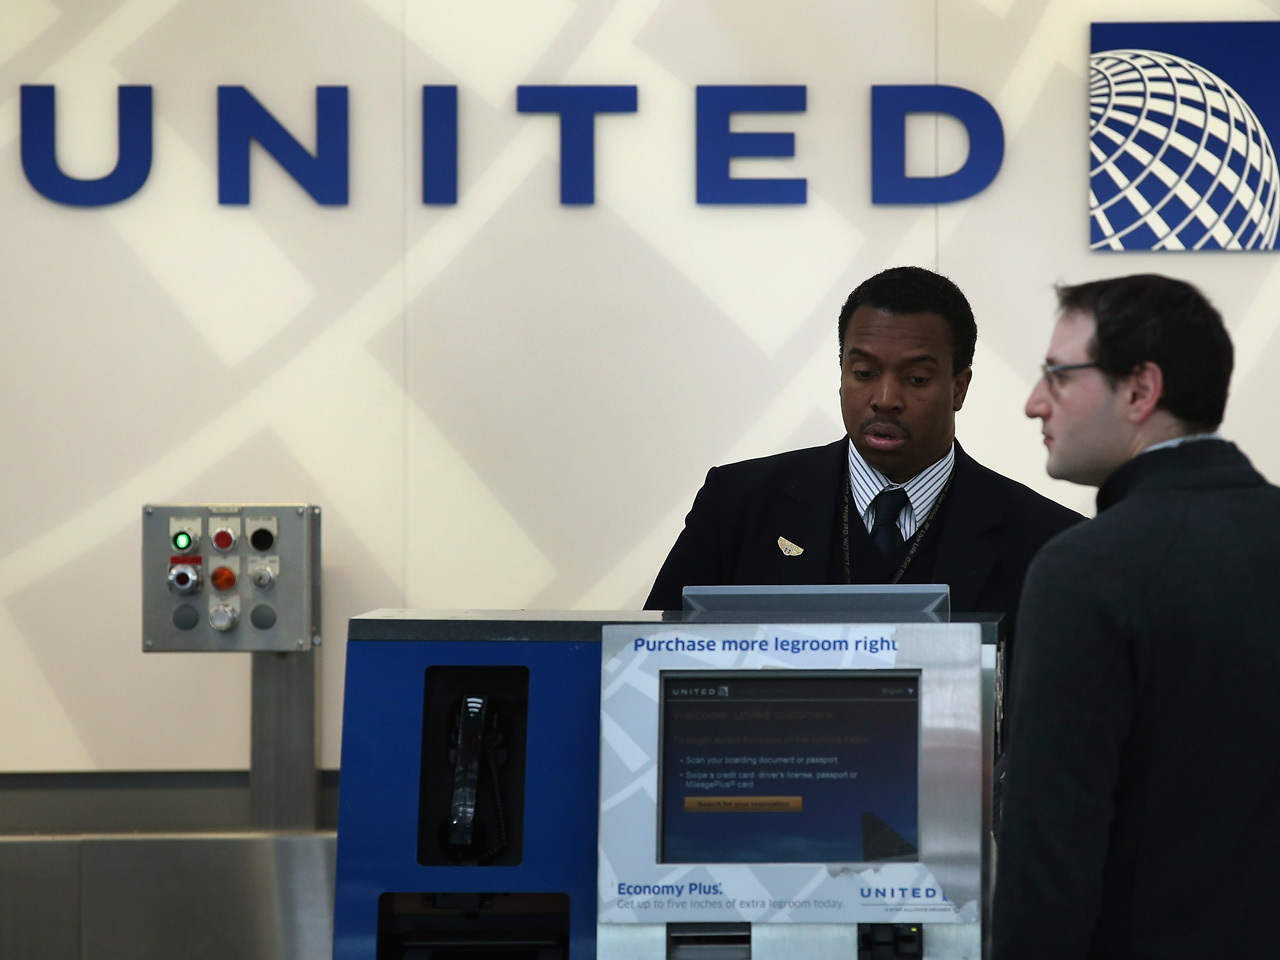 united-continental-earnings-up-38-percent-cbs-news